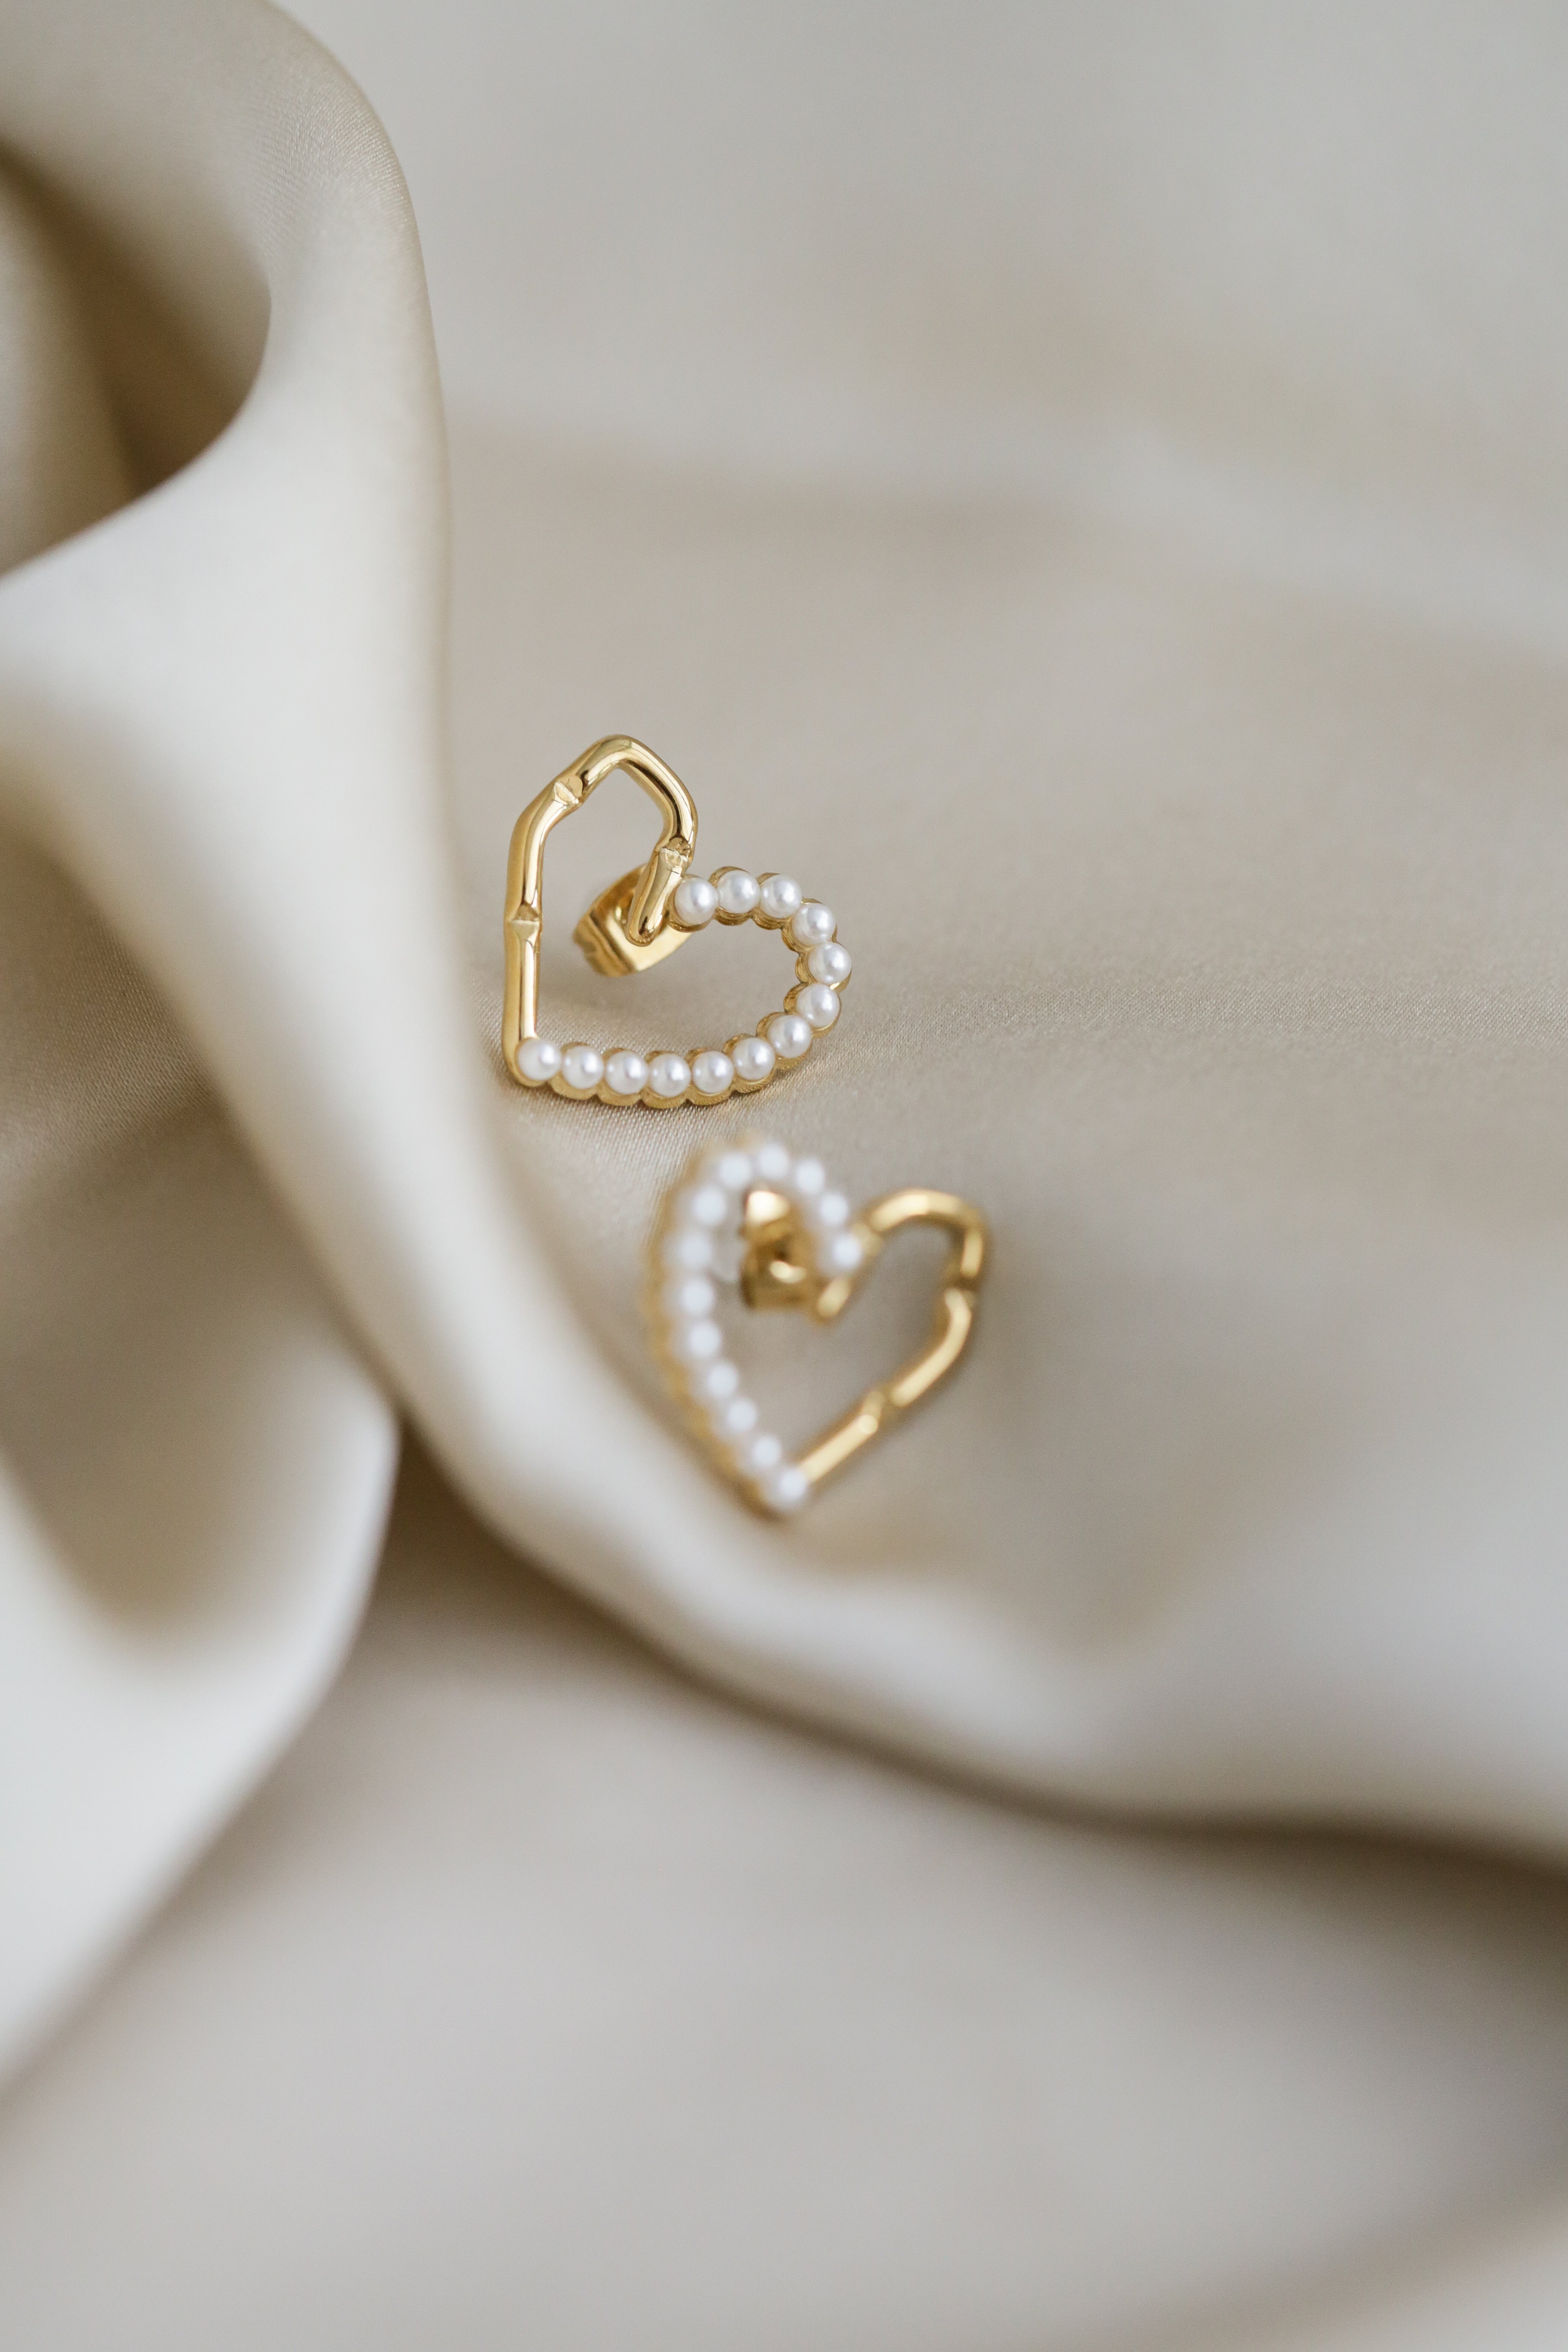 The Heart - Pearl Studs - Boutique Minimaliste has waterproof, durable, elegant and vintage inspired jewelry